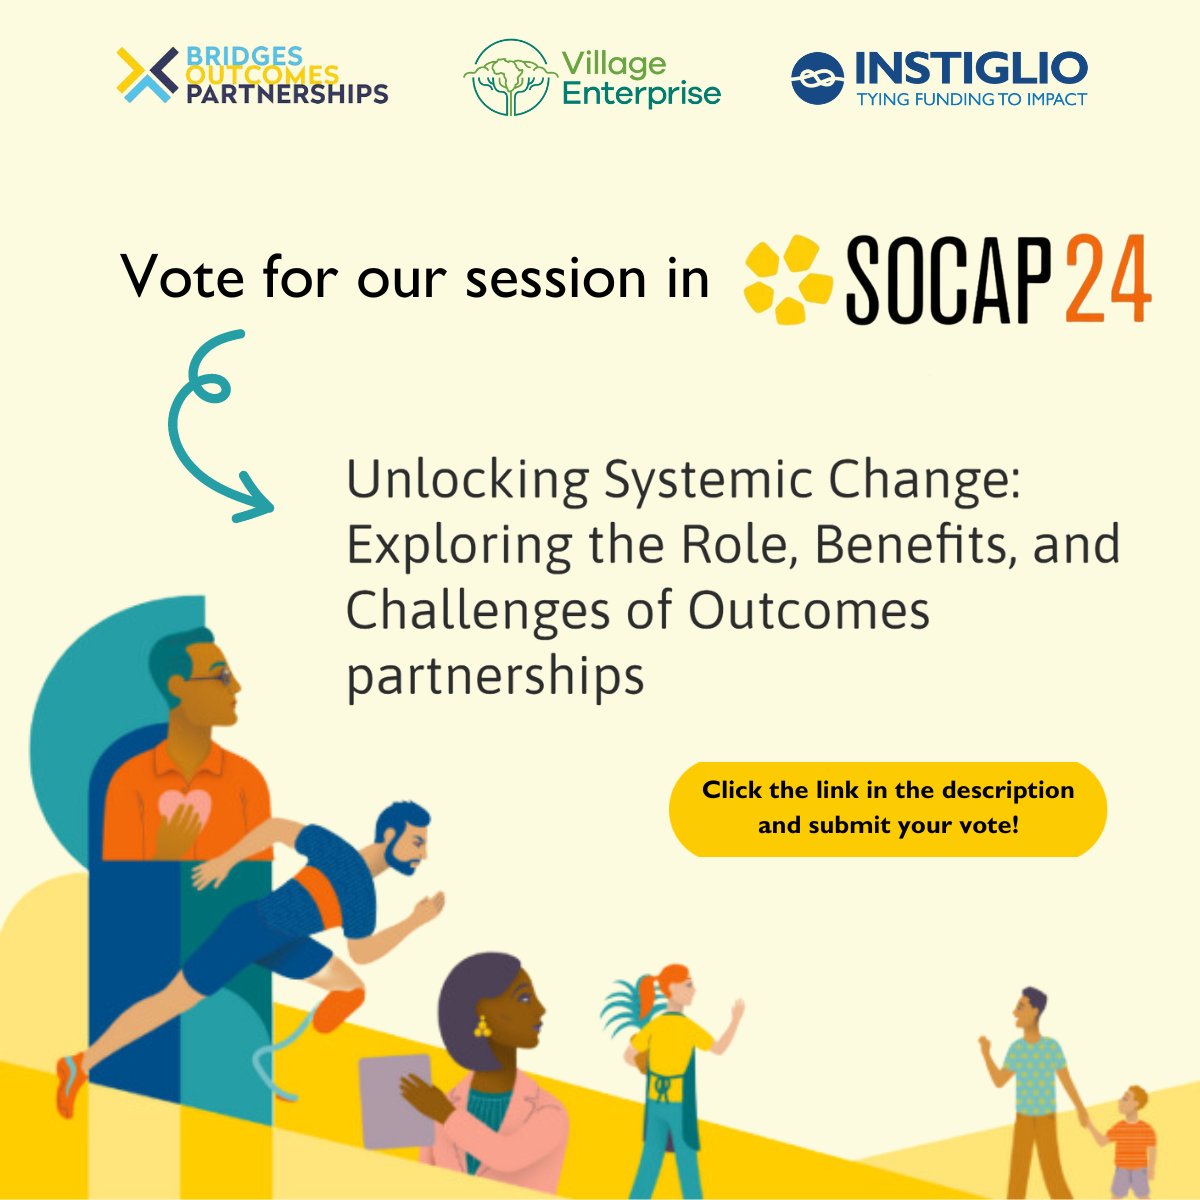 We are in the running to take the stage at #SOCAP24! Our session, with @village_ent & @BridgesOutcomes, would bring in @MilaLukic, @sebchaskel, & @BrubakerCeleste to discuss how funders can catalyze impact through outcomes partnerships! Vote for us! ➡️ ow.ly/o3E650R8Mie